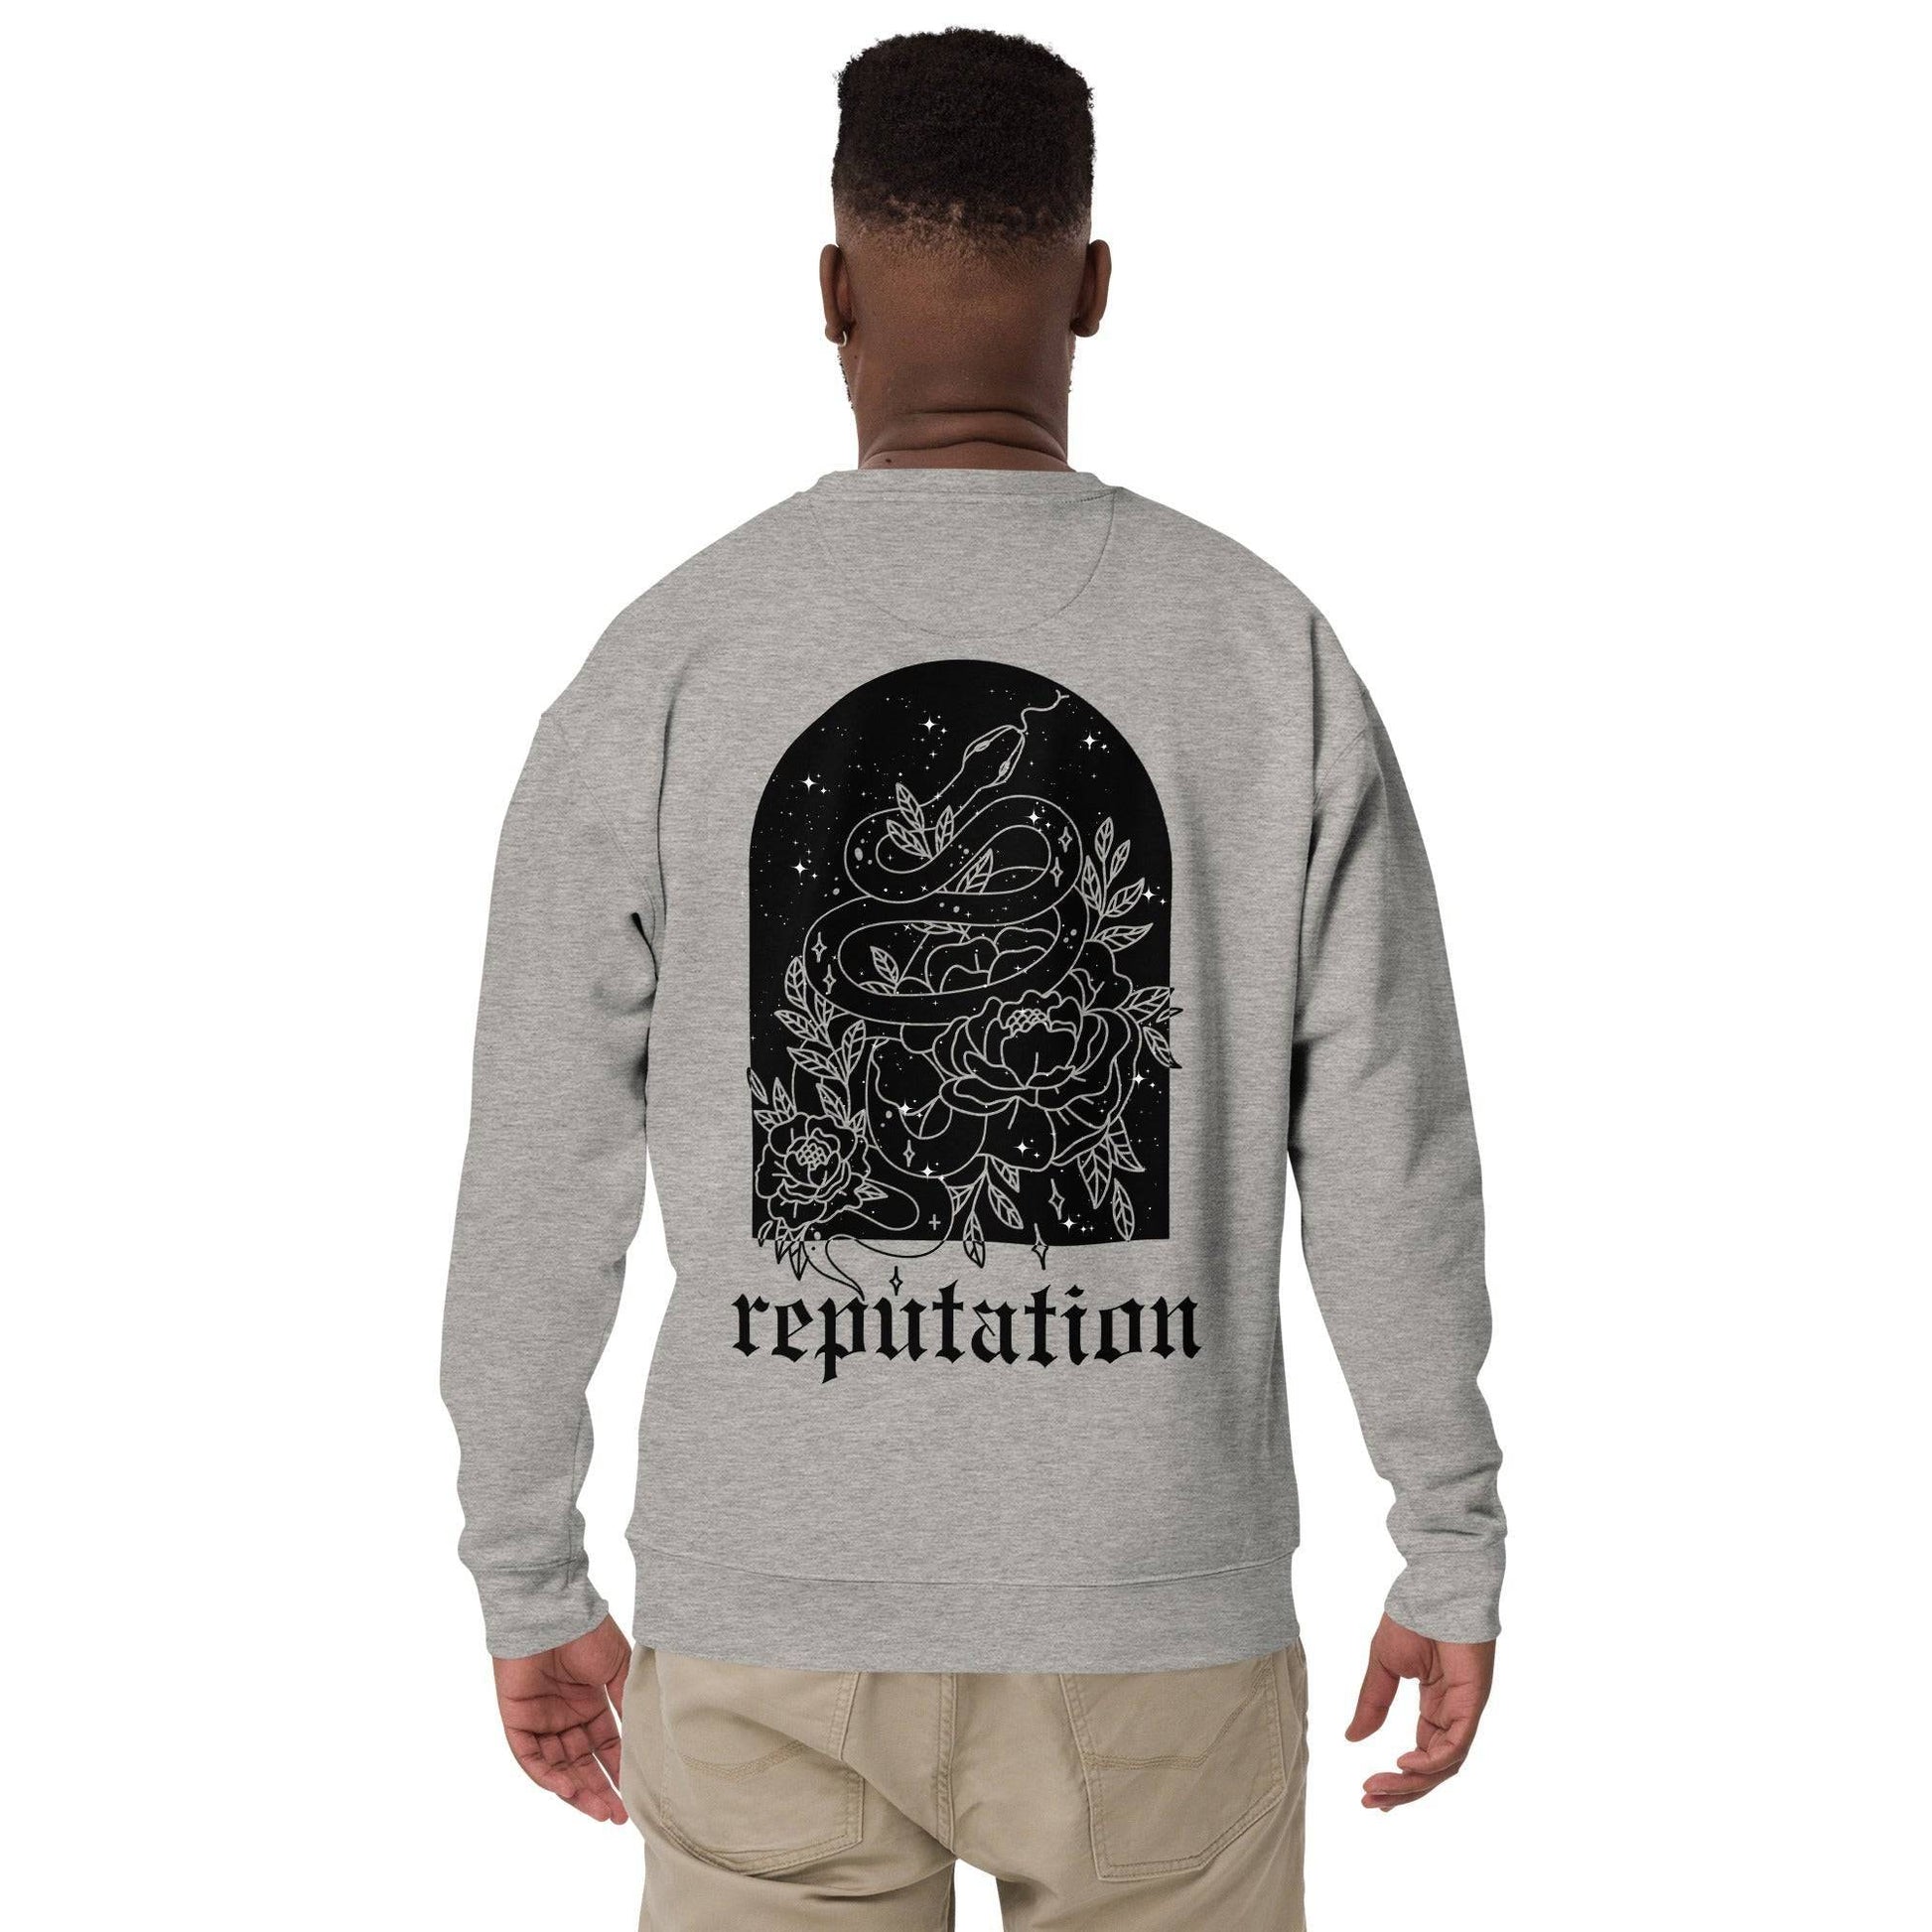 Taylor Swift End Game Embroidered Sweatshirt Carbon Grey